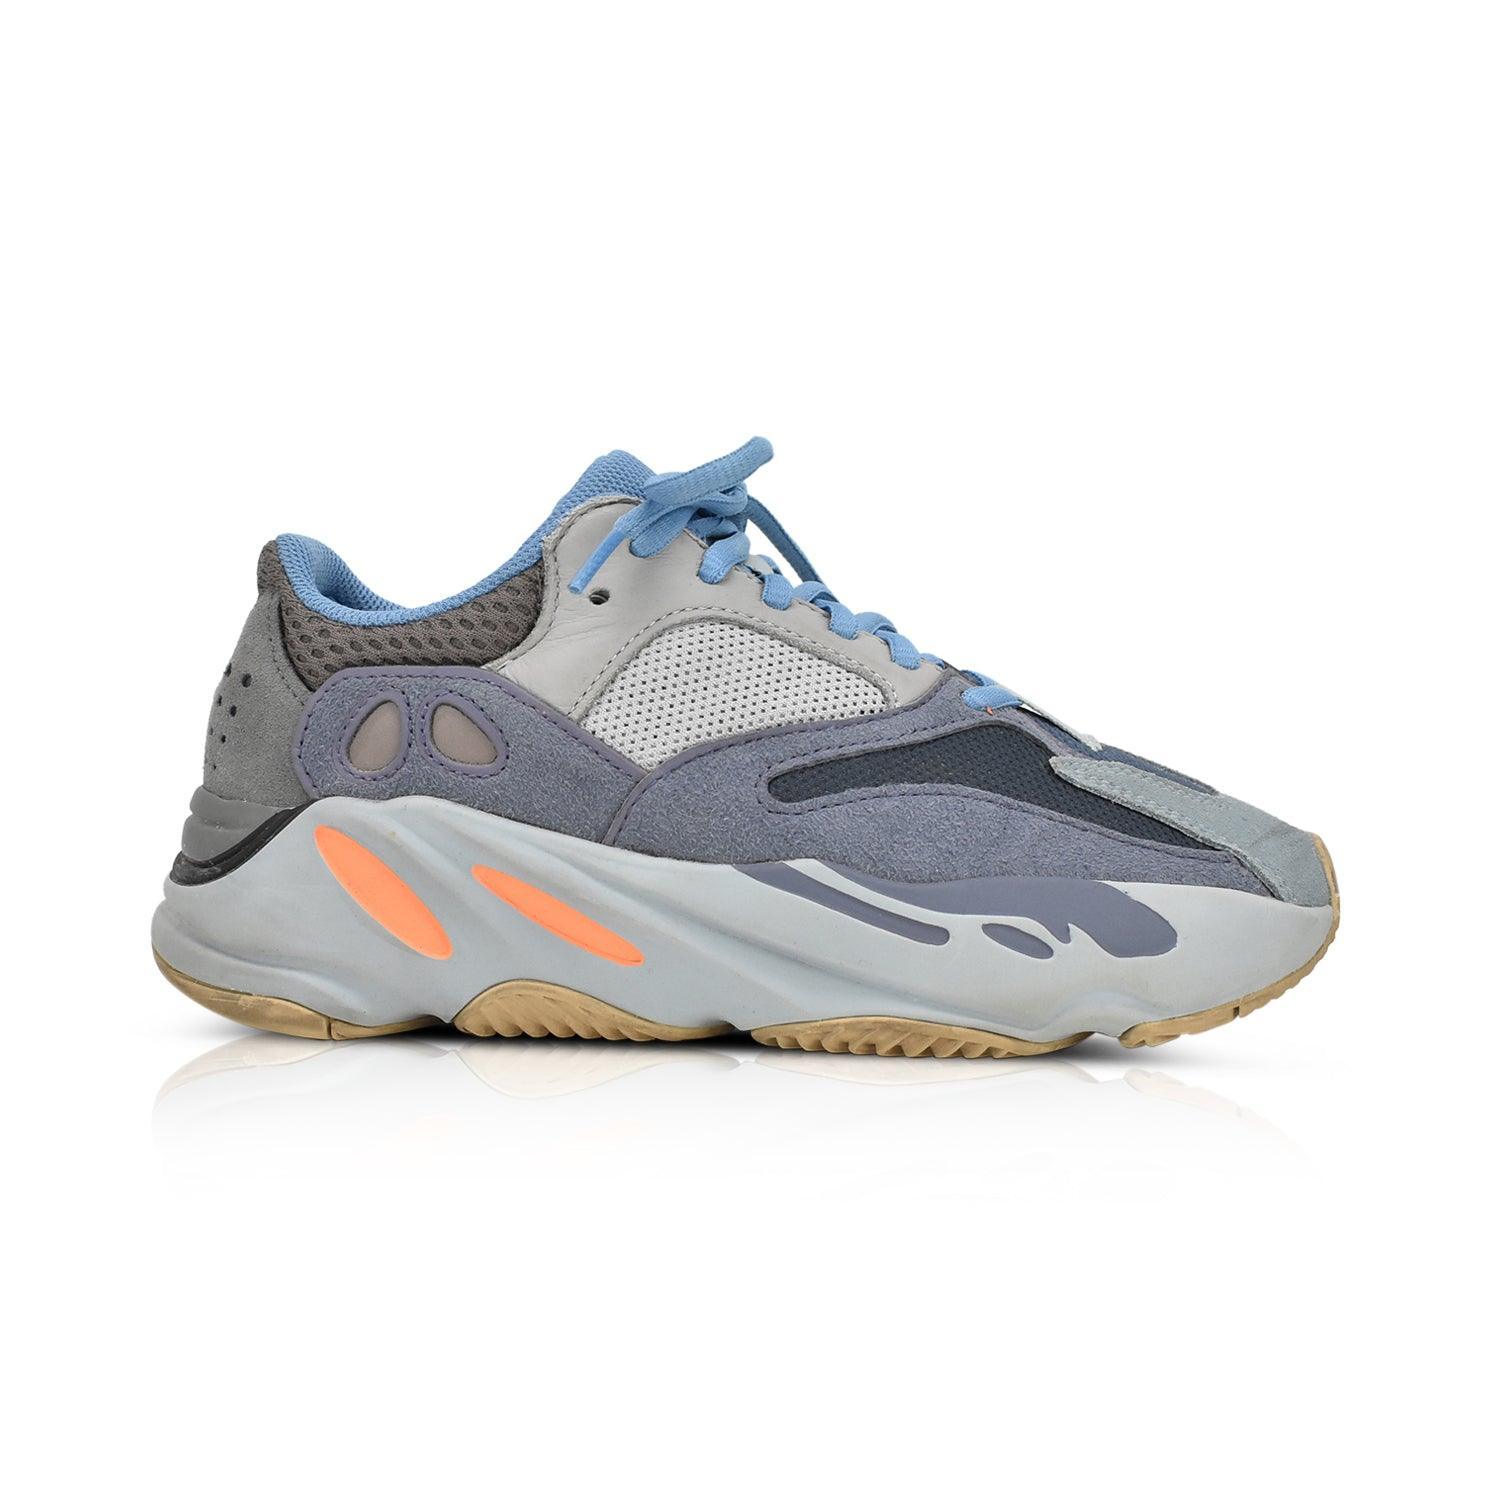 Adidas x Yeezy 'Boost 700 Carbon Blue' Sneakers - Men's 4.5/Women's 6 - Fashionably Yours